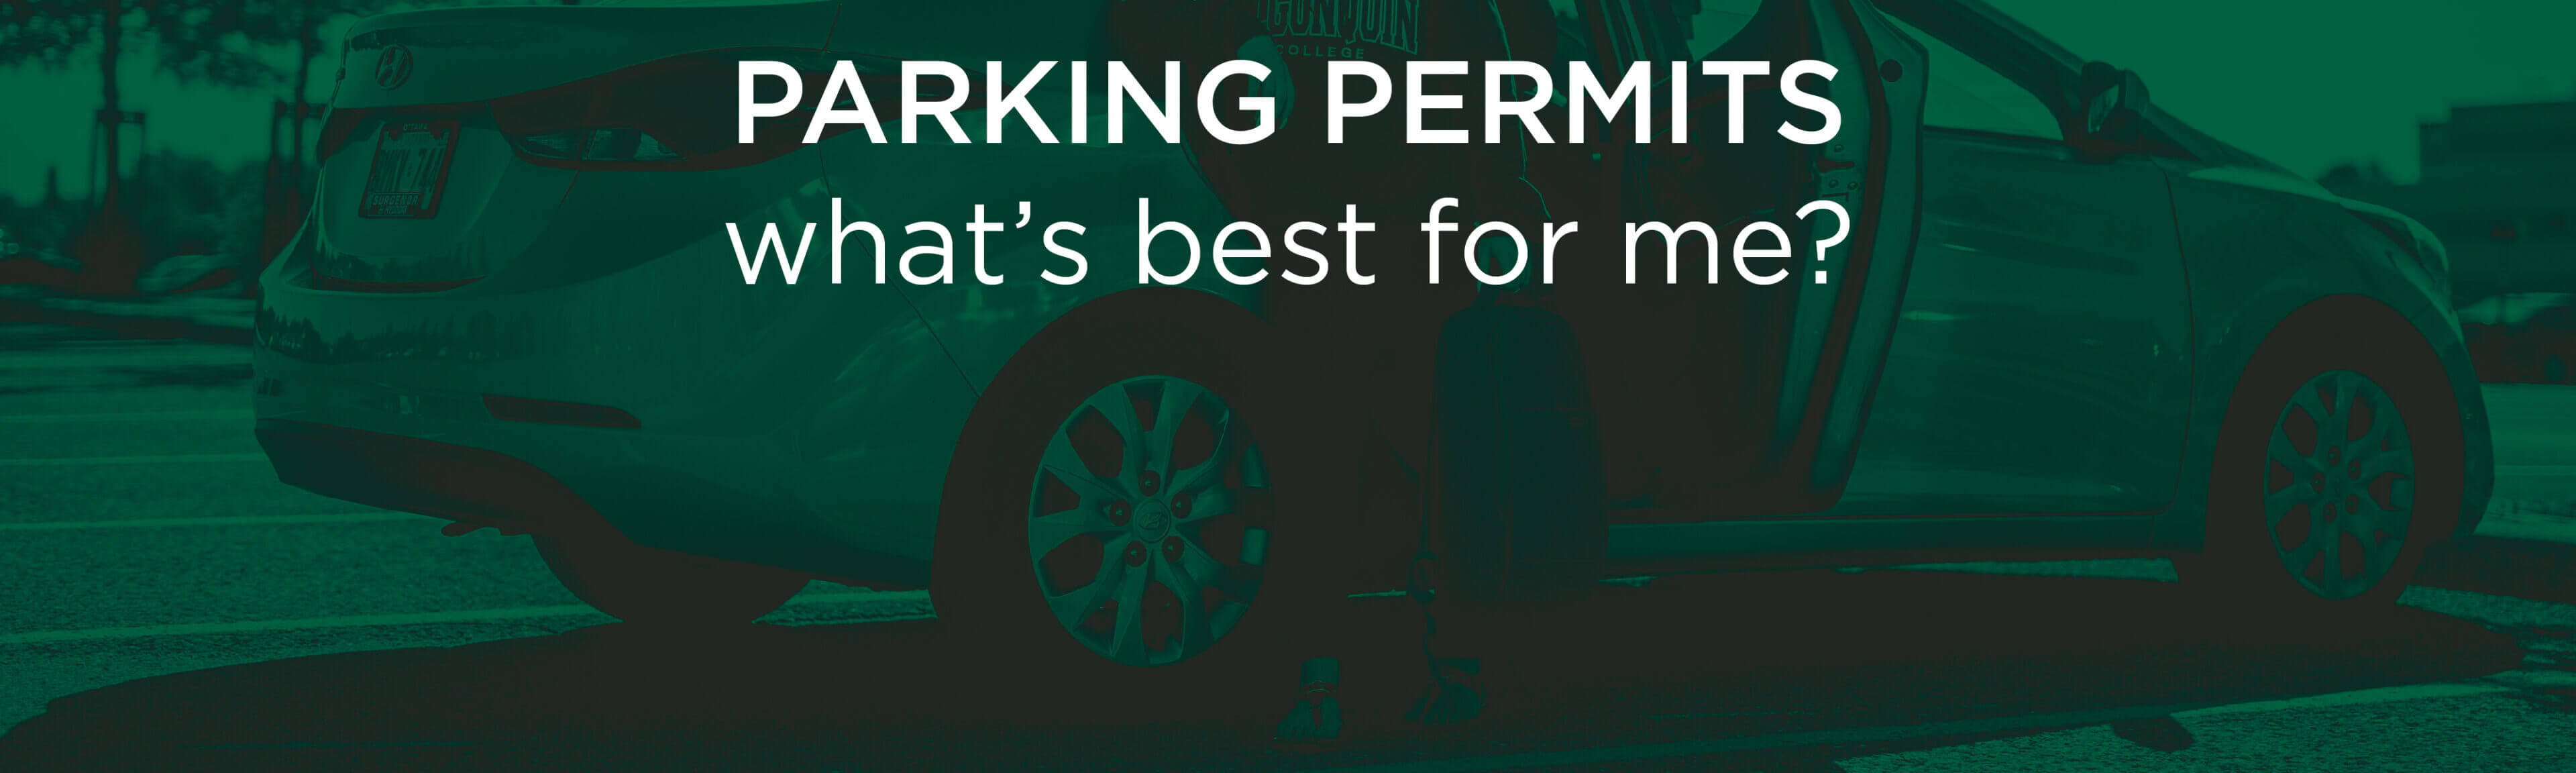 Parking Permits. What's best for me?